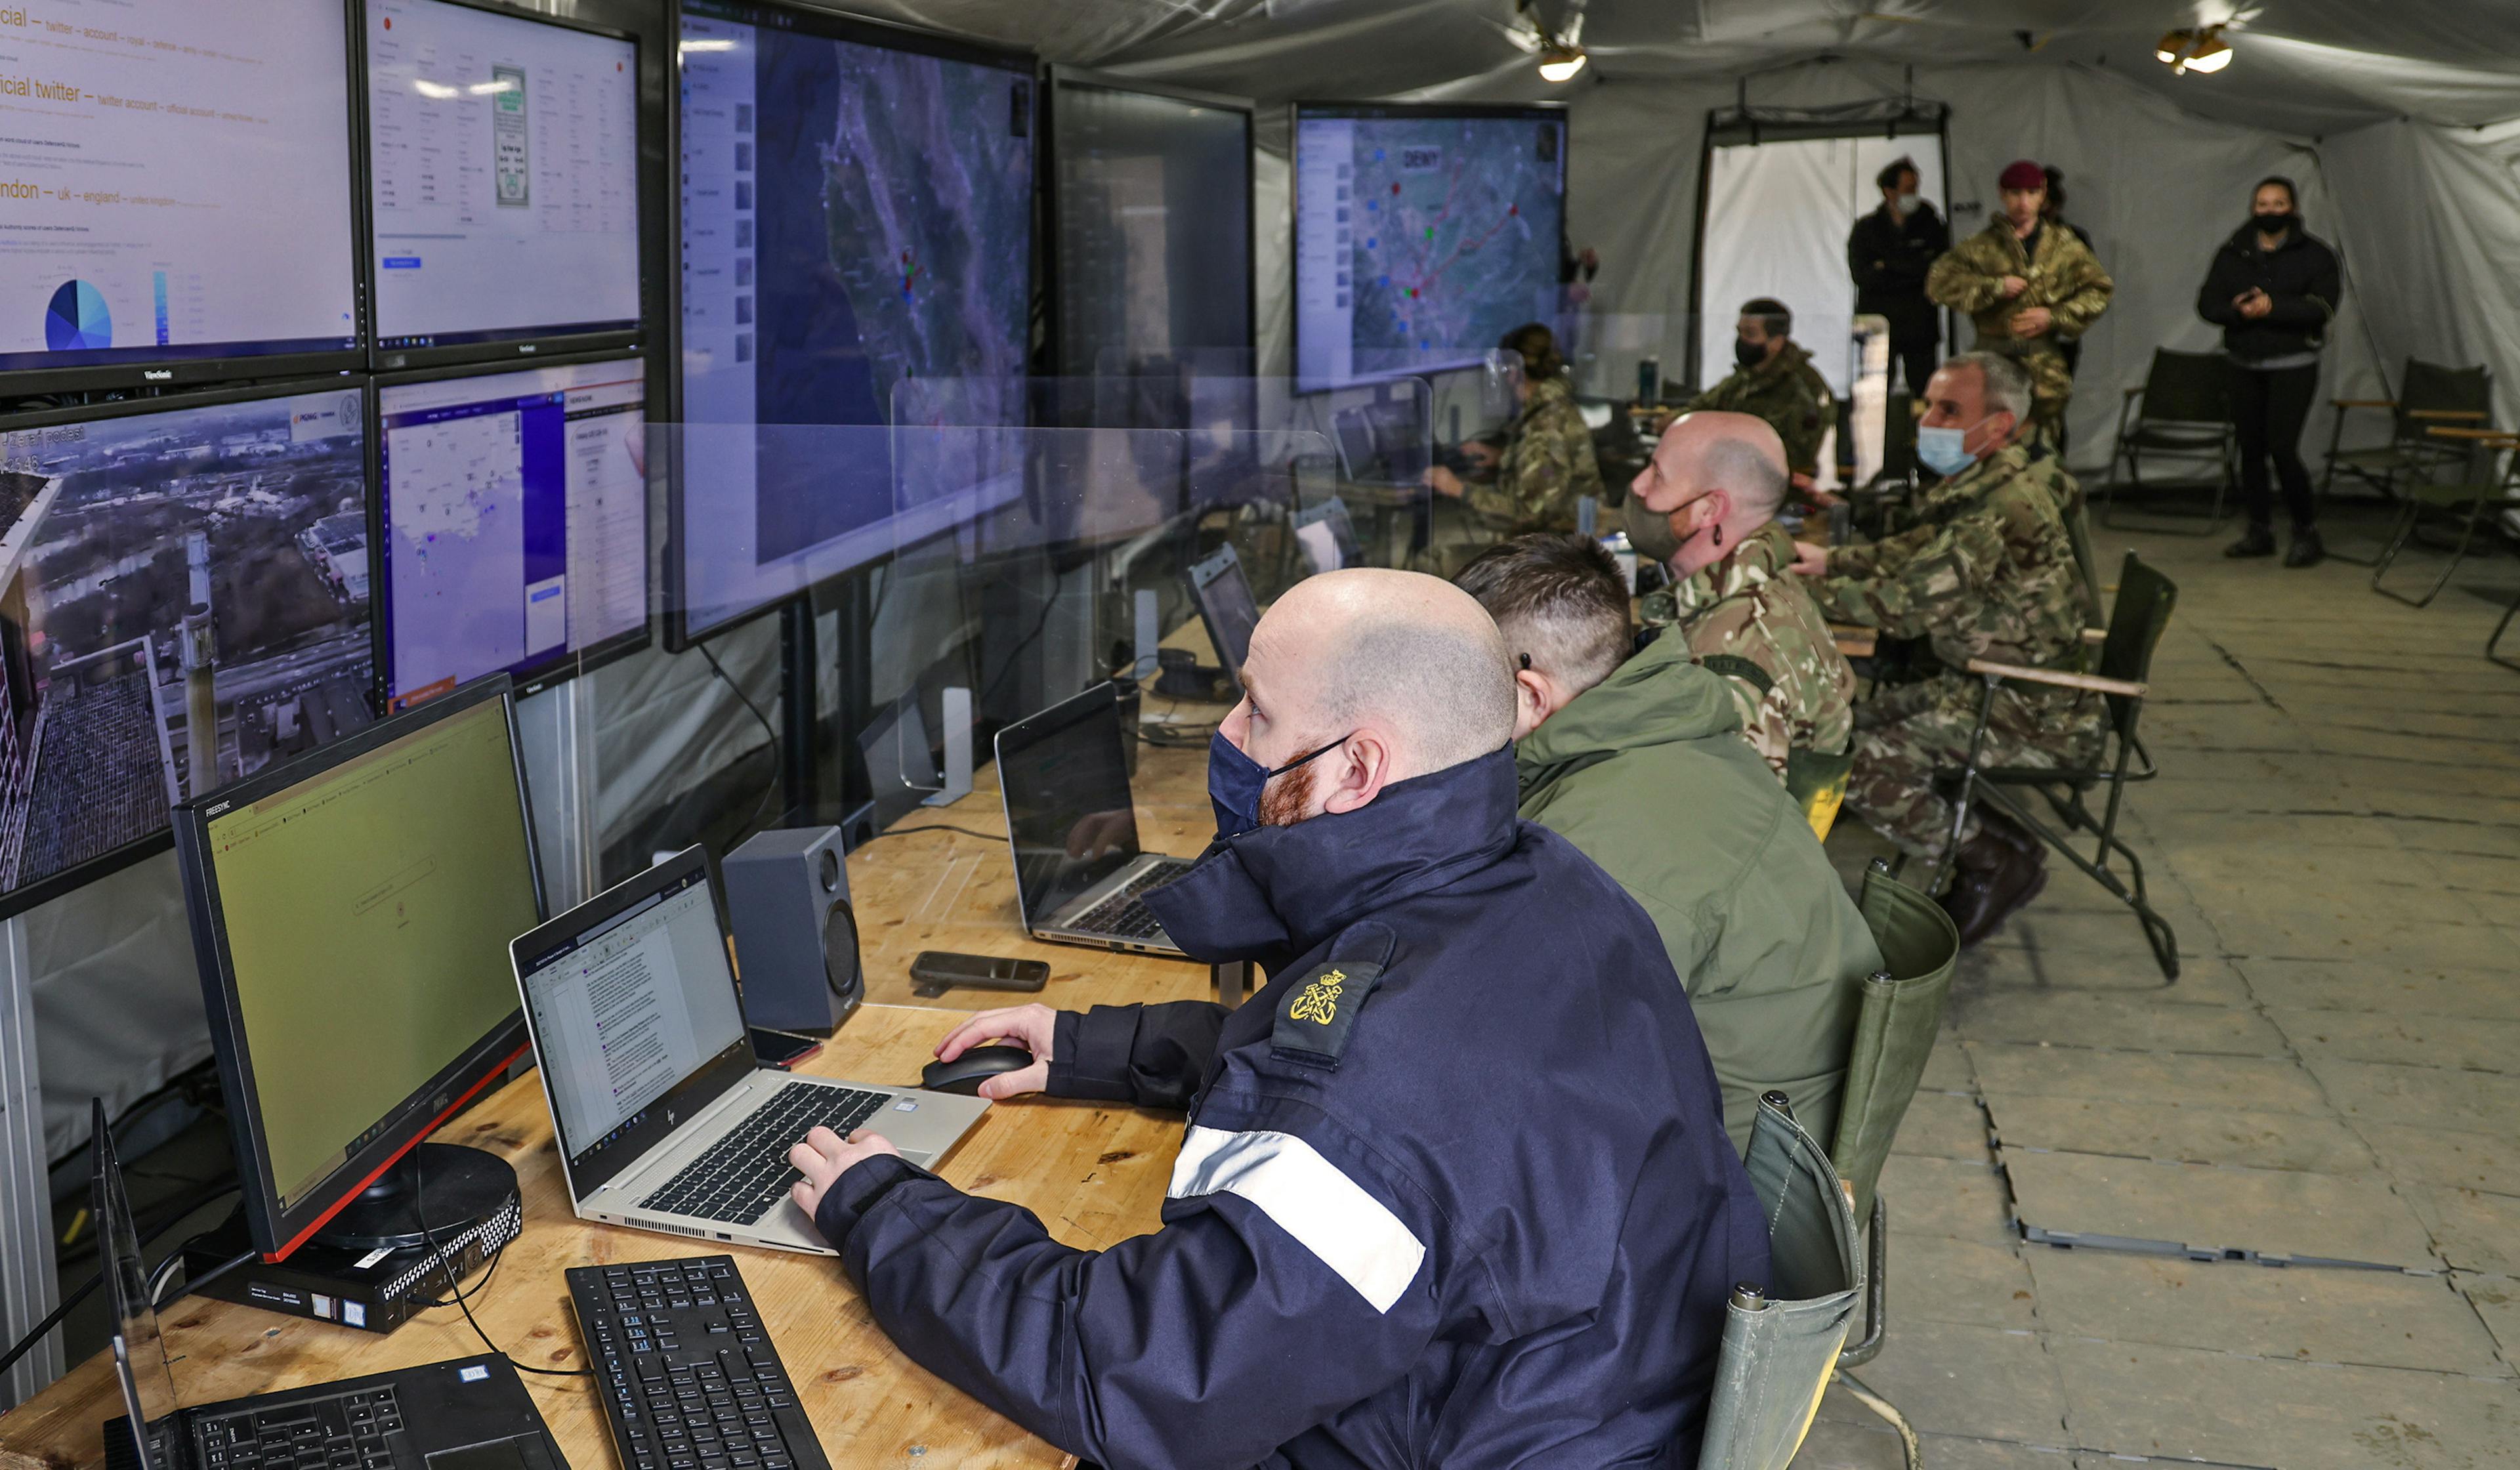 Room of military men on computers.